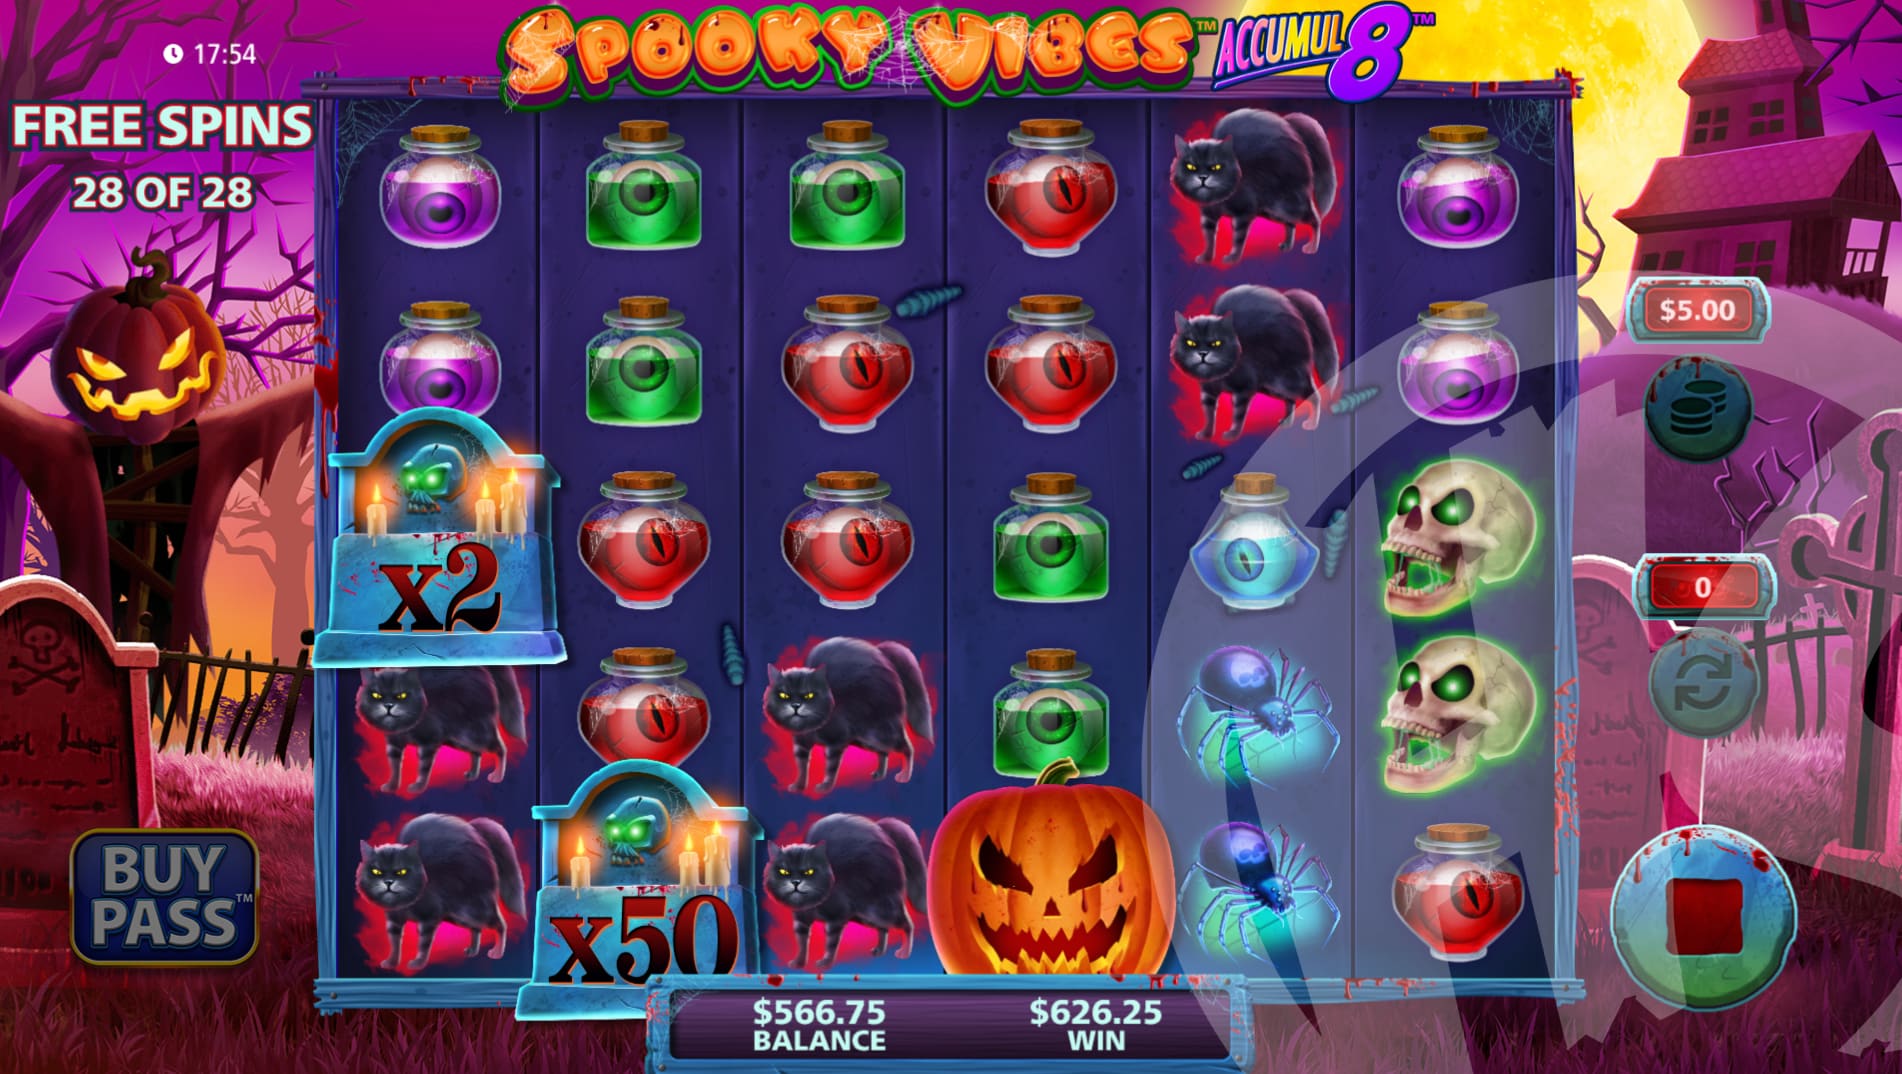 Spooky Vibes Accumul8 Free Spins